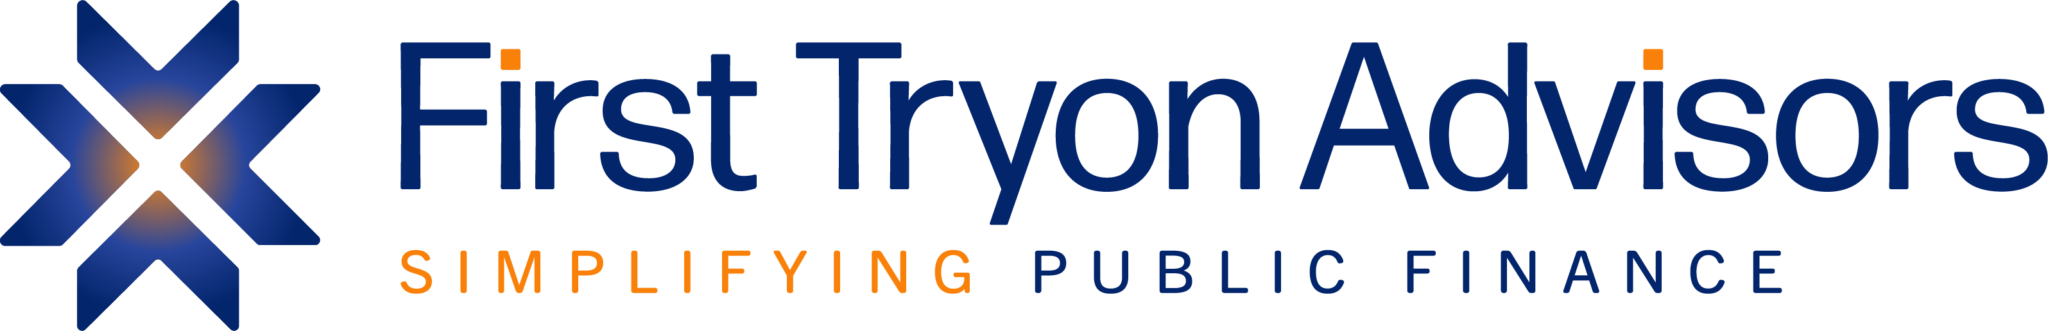 First Tryon Advisors 